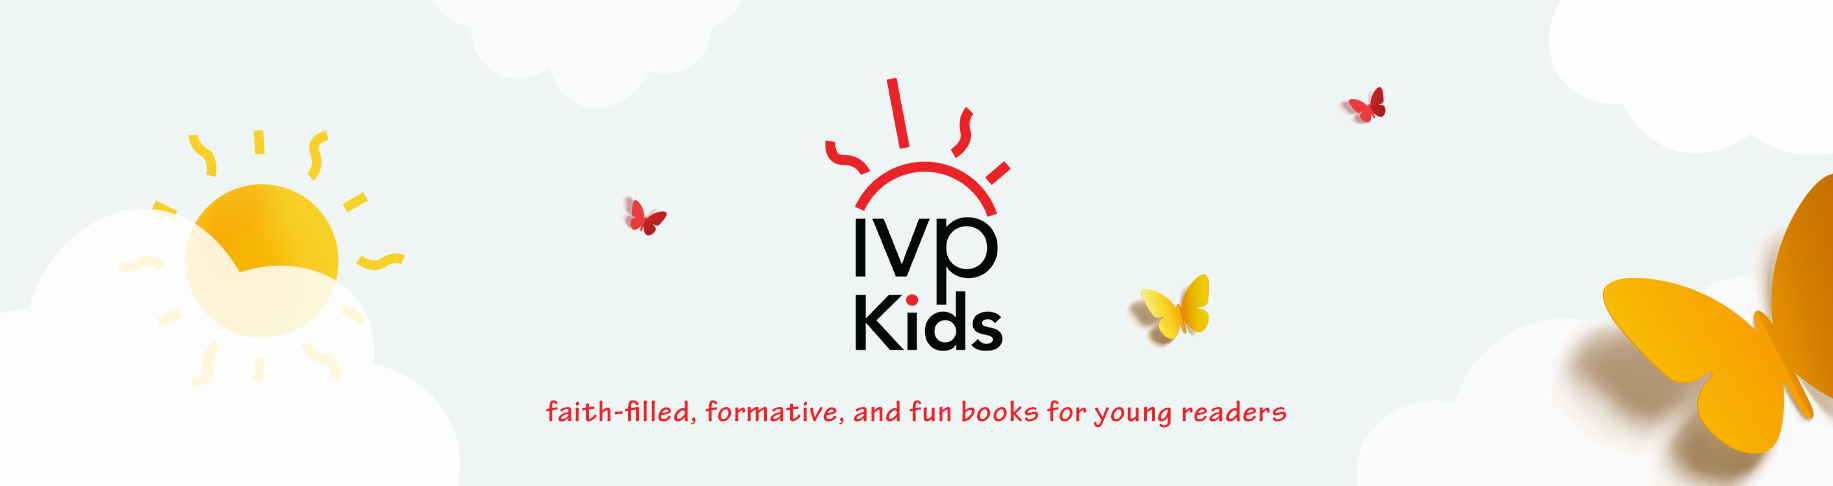 IVP Kids - Faith-filled, formative, and fun books for young readers